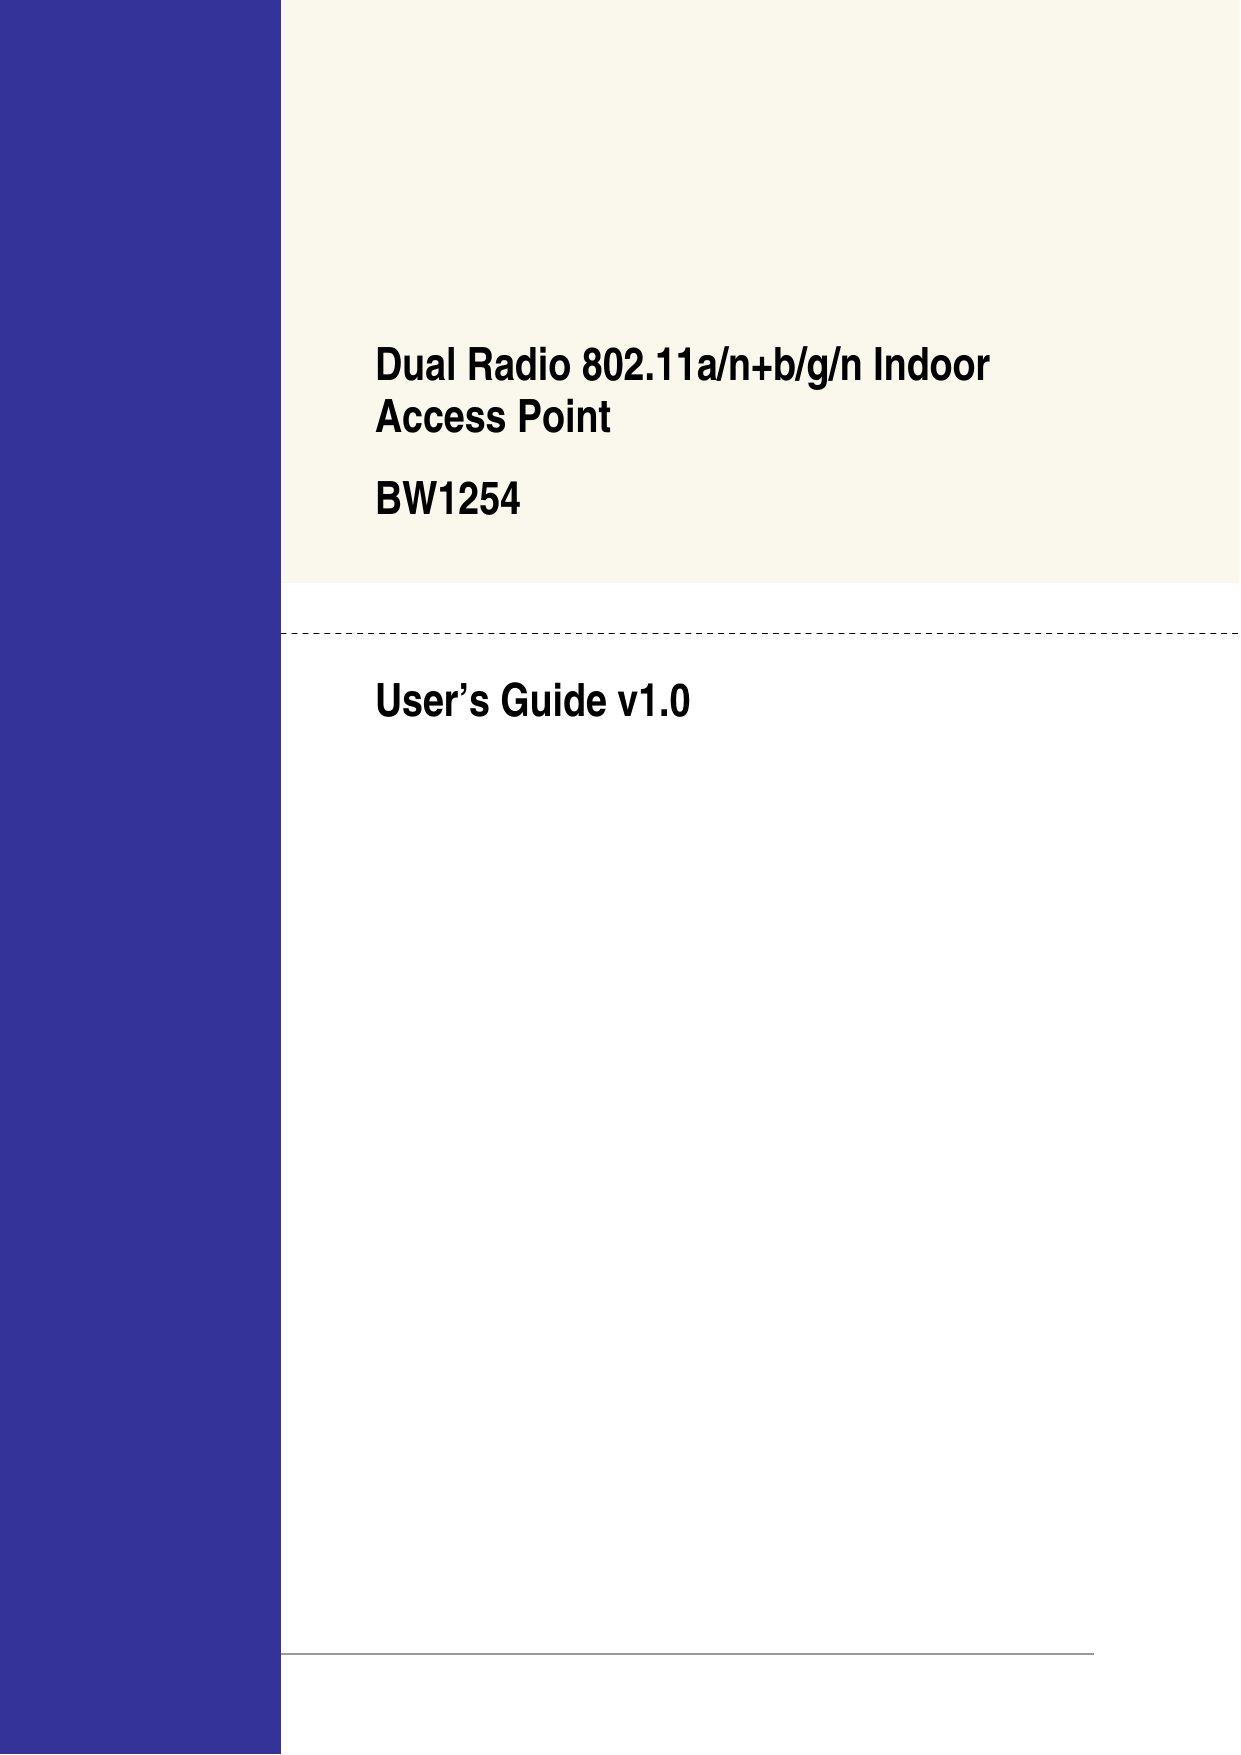     Dual Radio 802.11a/n+b/g/n Indoor Access Point BW1254  User’s Guide v1.0                              